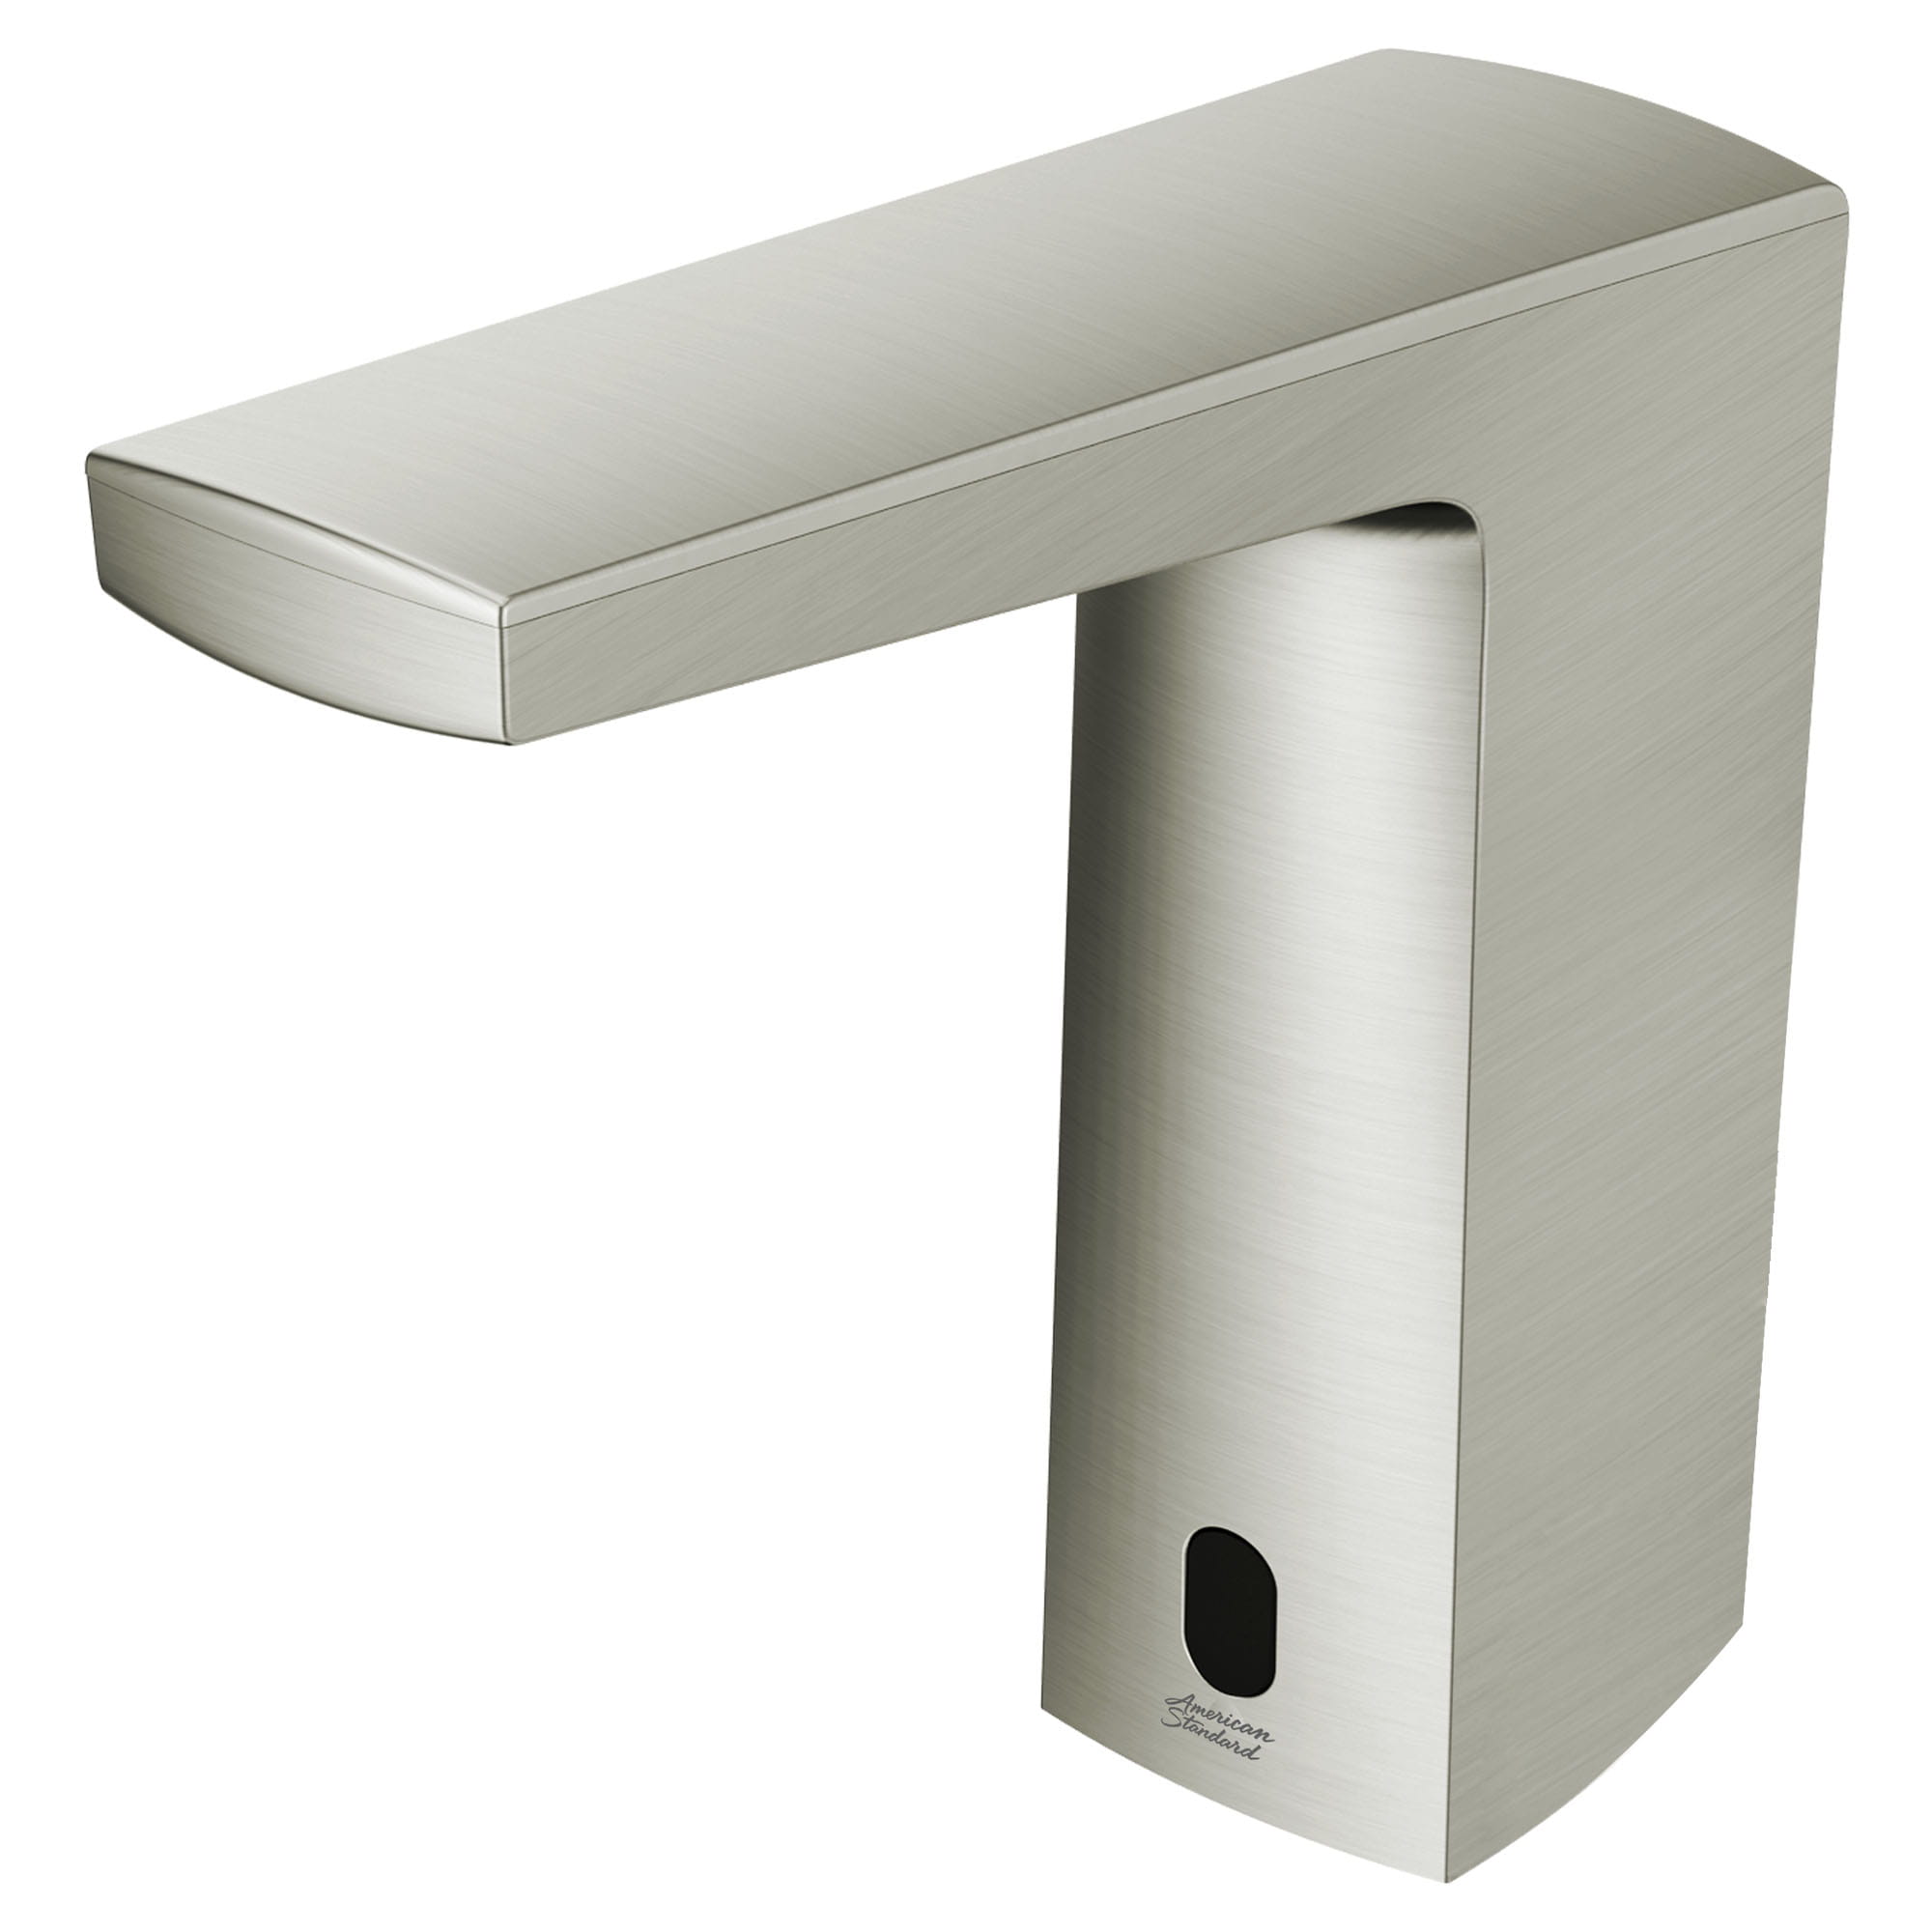 Paradigm® Selectronic® Touchless Faucet, Battery-Powered, 0.5 gpm/1.9 Lpm